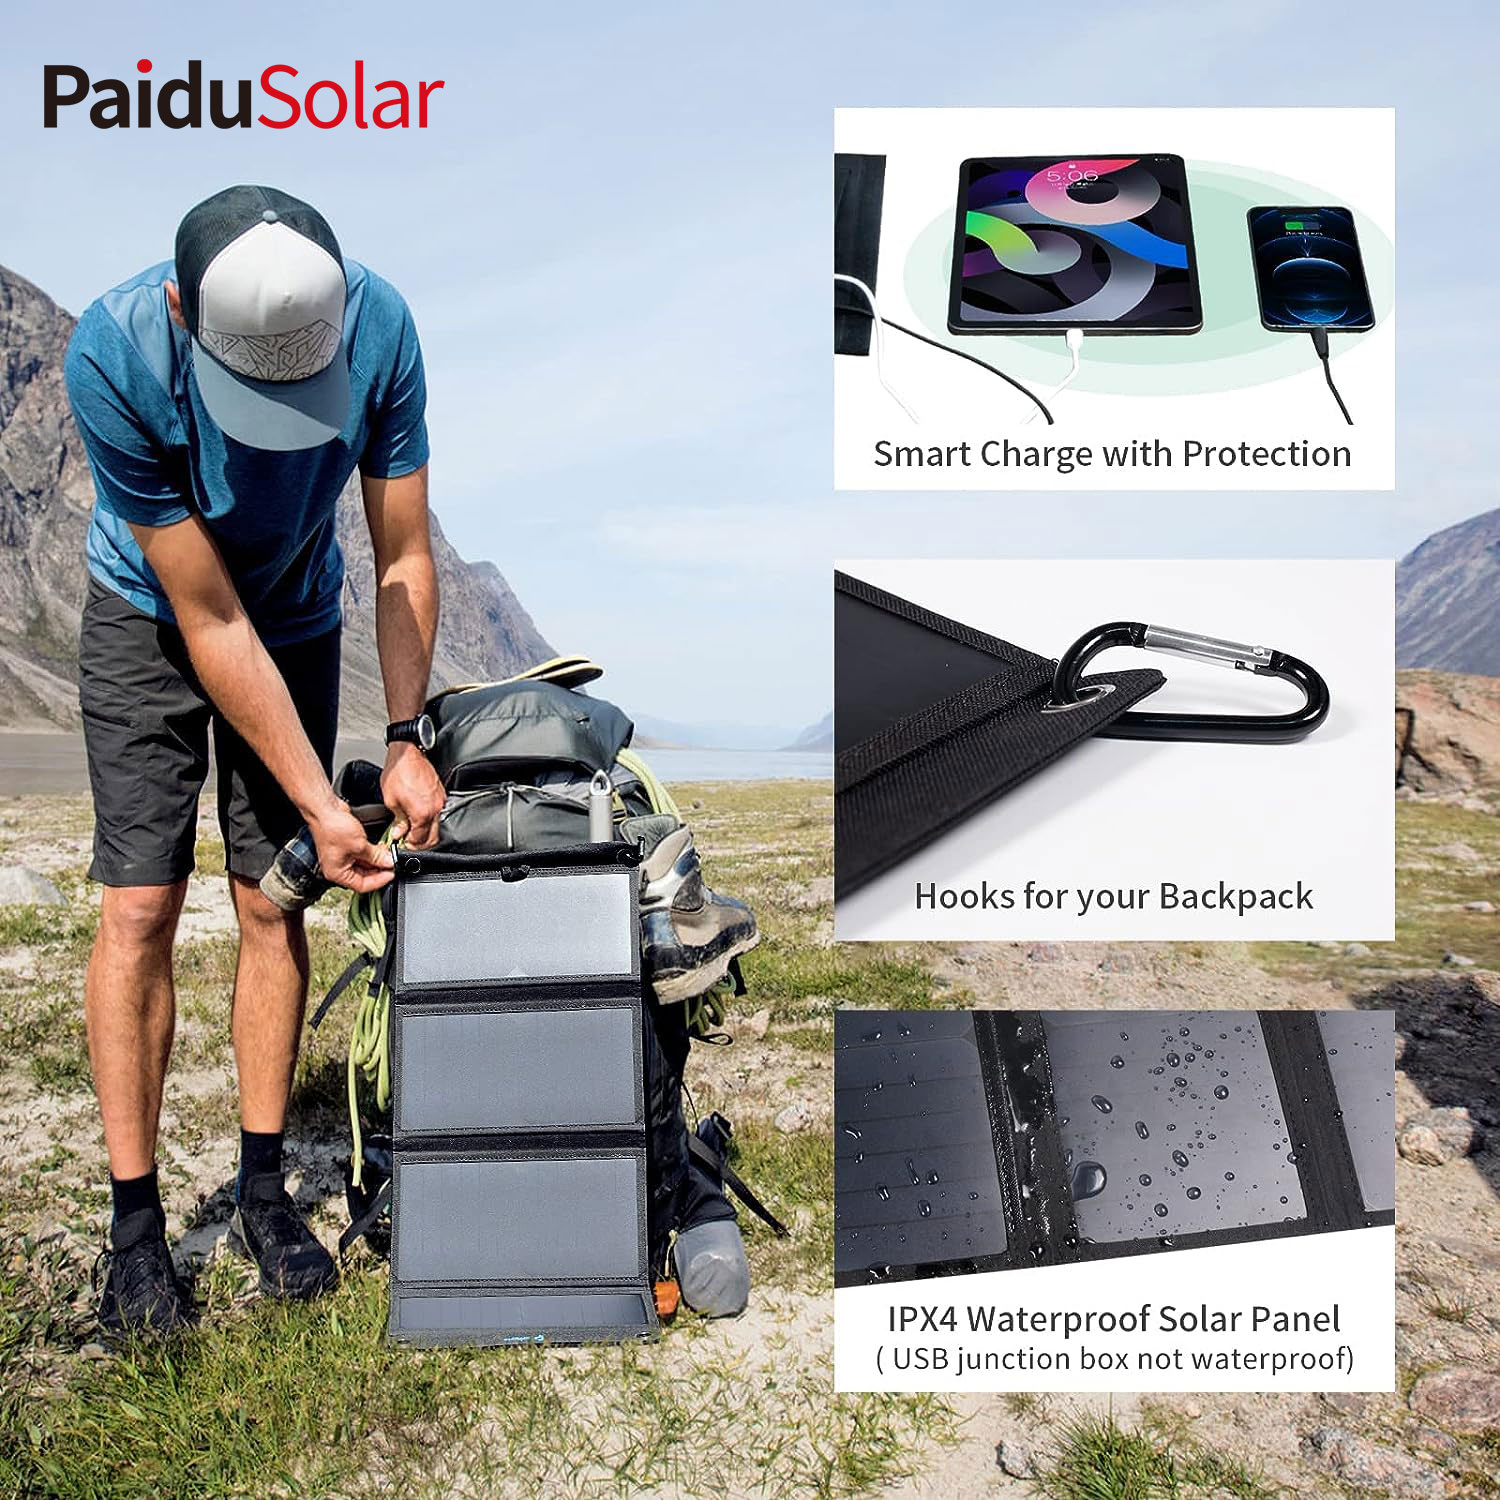 PaiduSolar 3 USB Ports 28W Solar Charger IPX4 Waterproof Portable Solar Panel For Camping